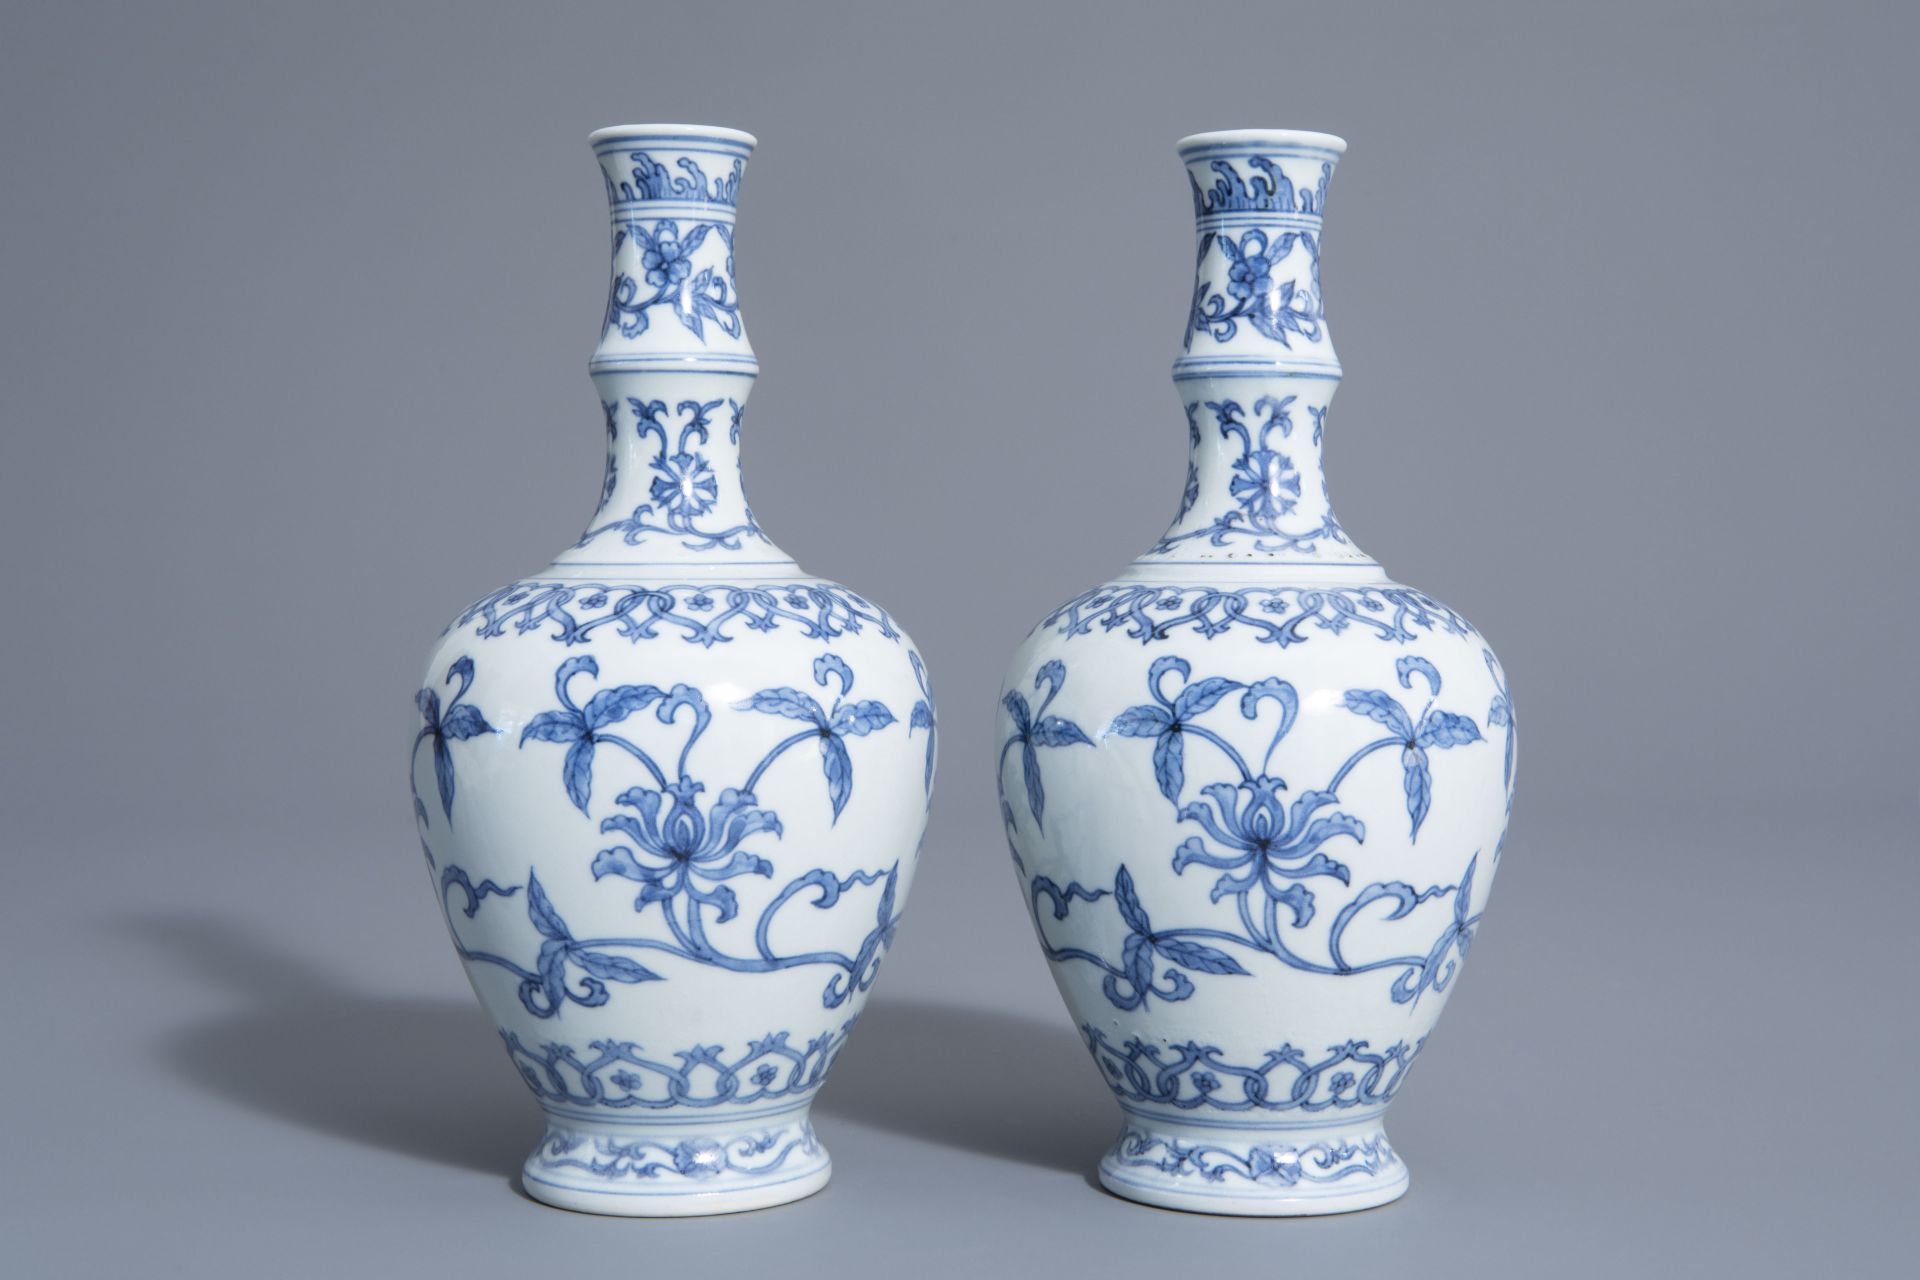 A pair of Chinese blue and white vases with floral design, Chenghua mark, 19th/20th C. - Image 2 of 6